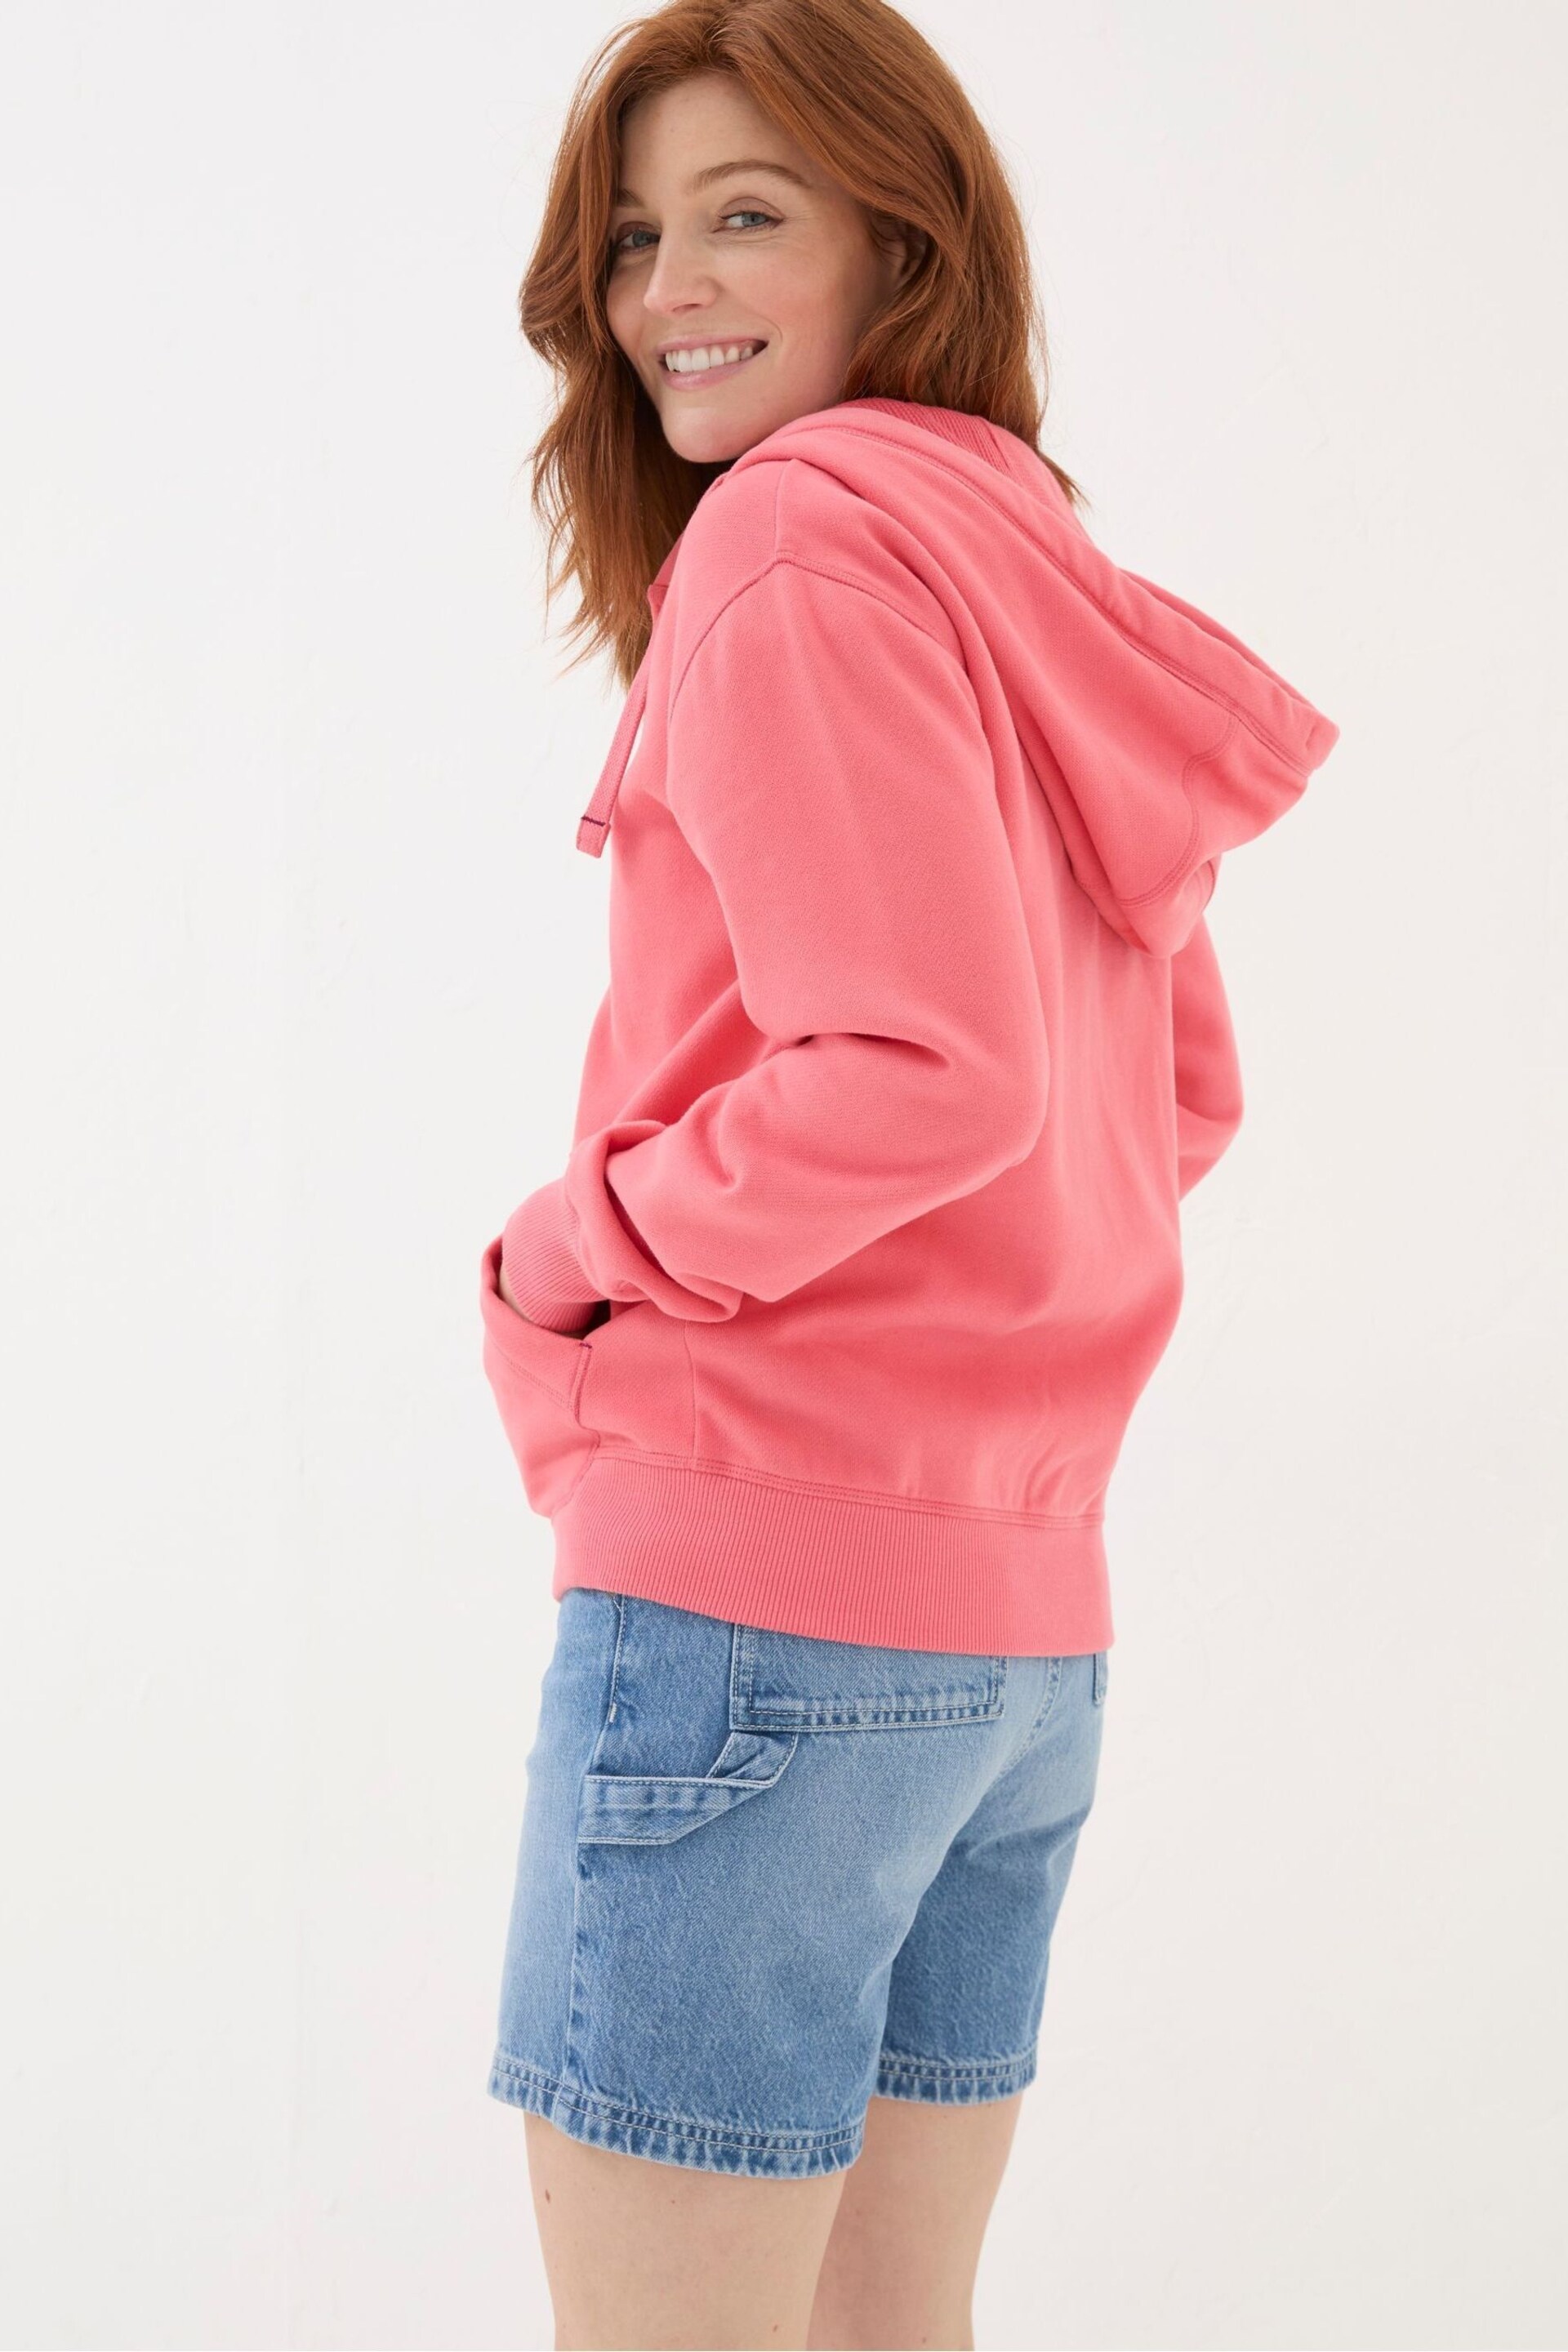 FatFace Pink Amy Zip Through Hoodie - Image 2 of 5